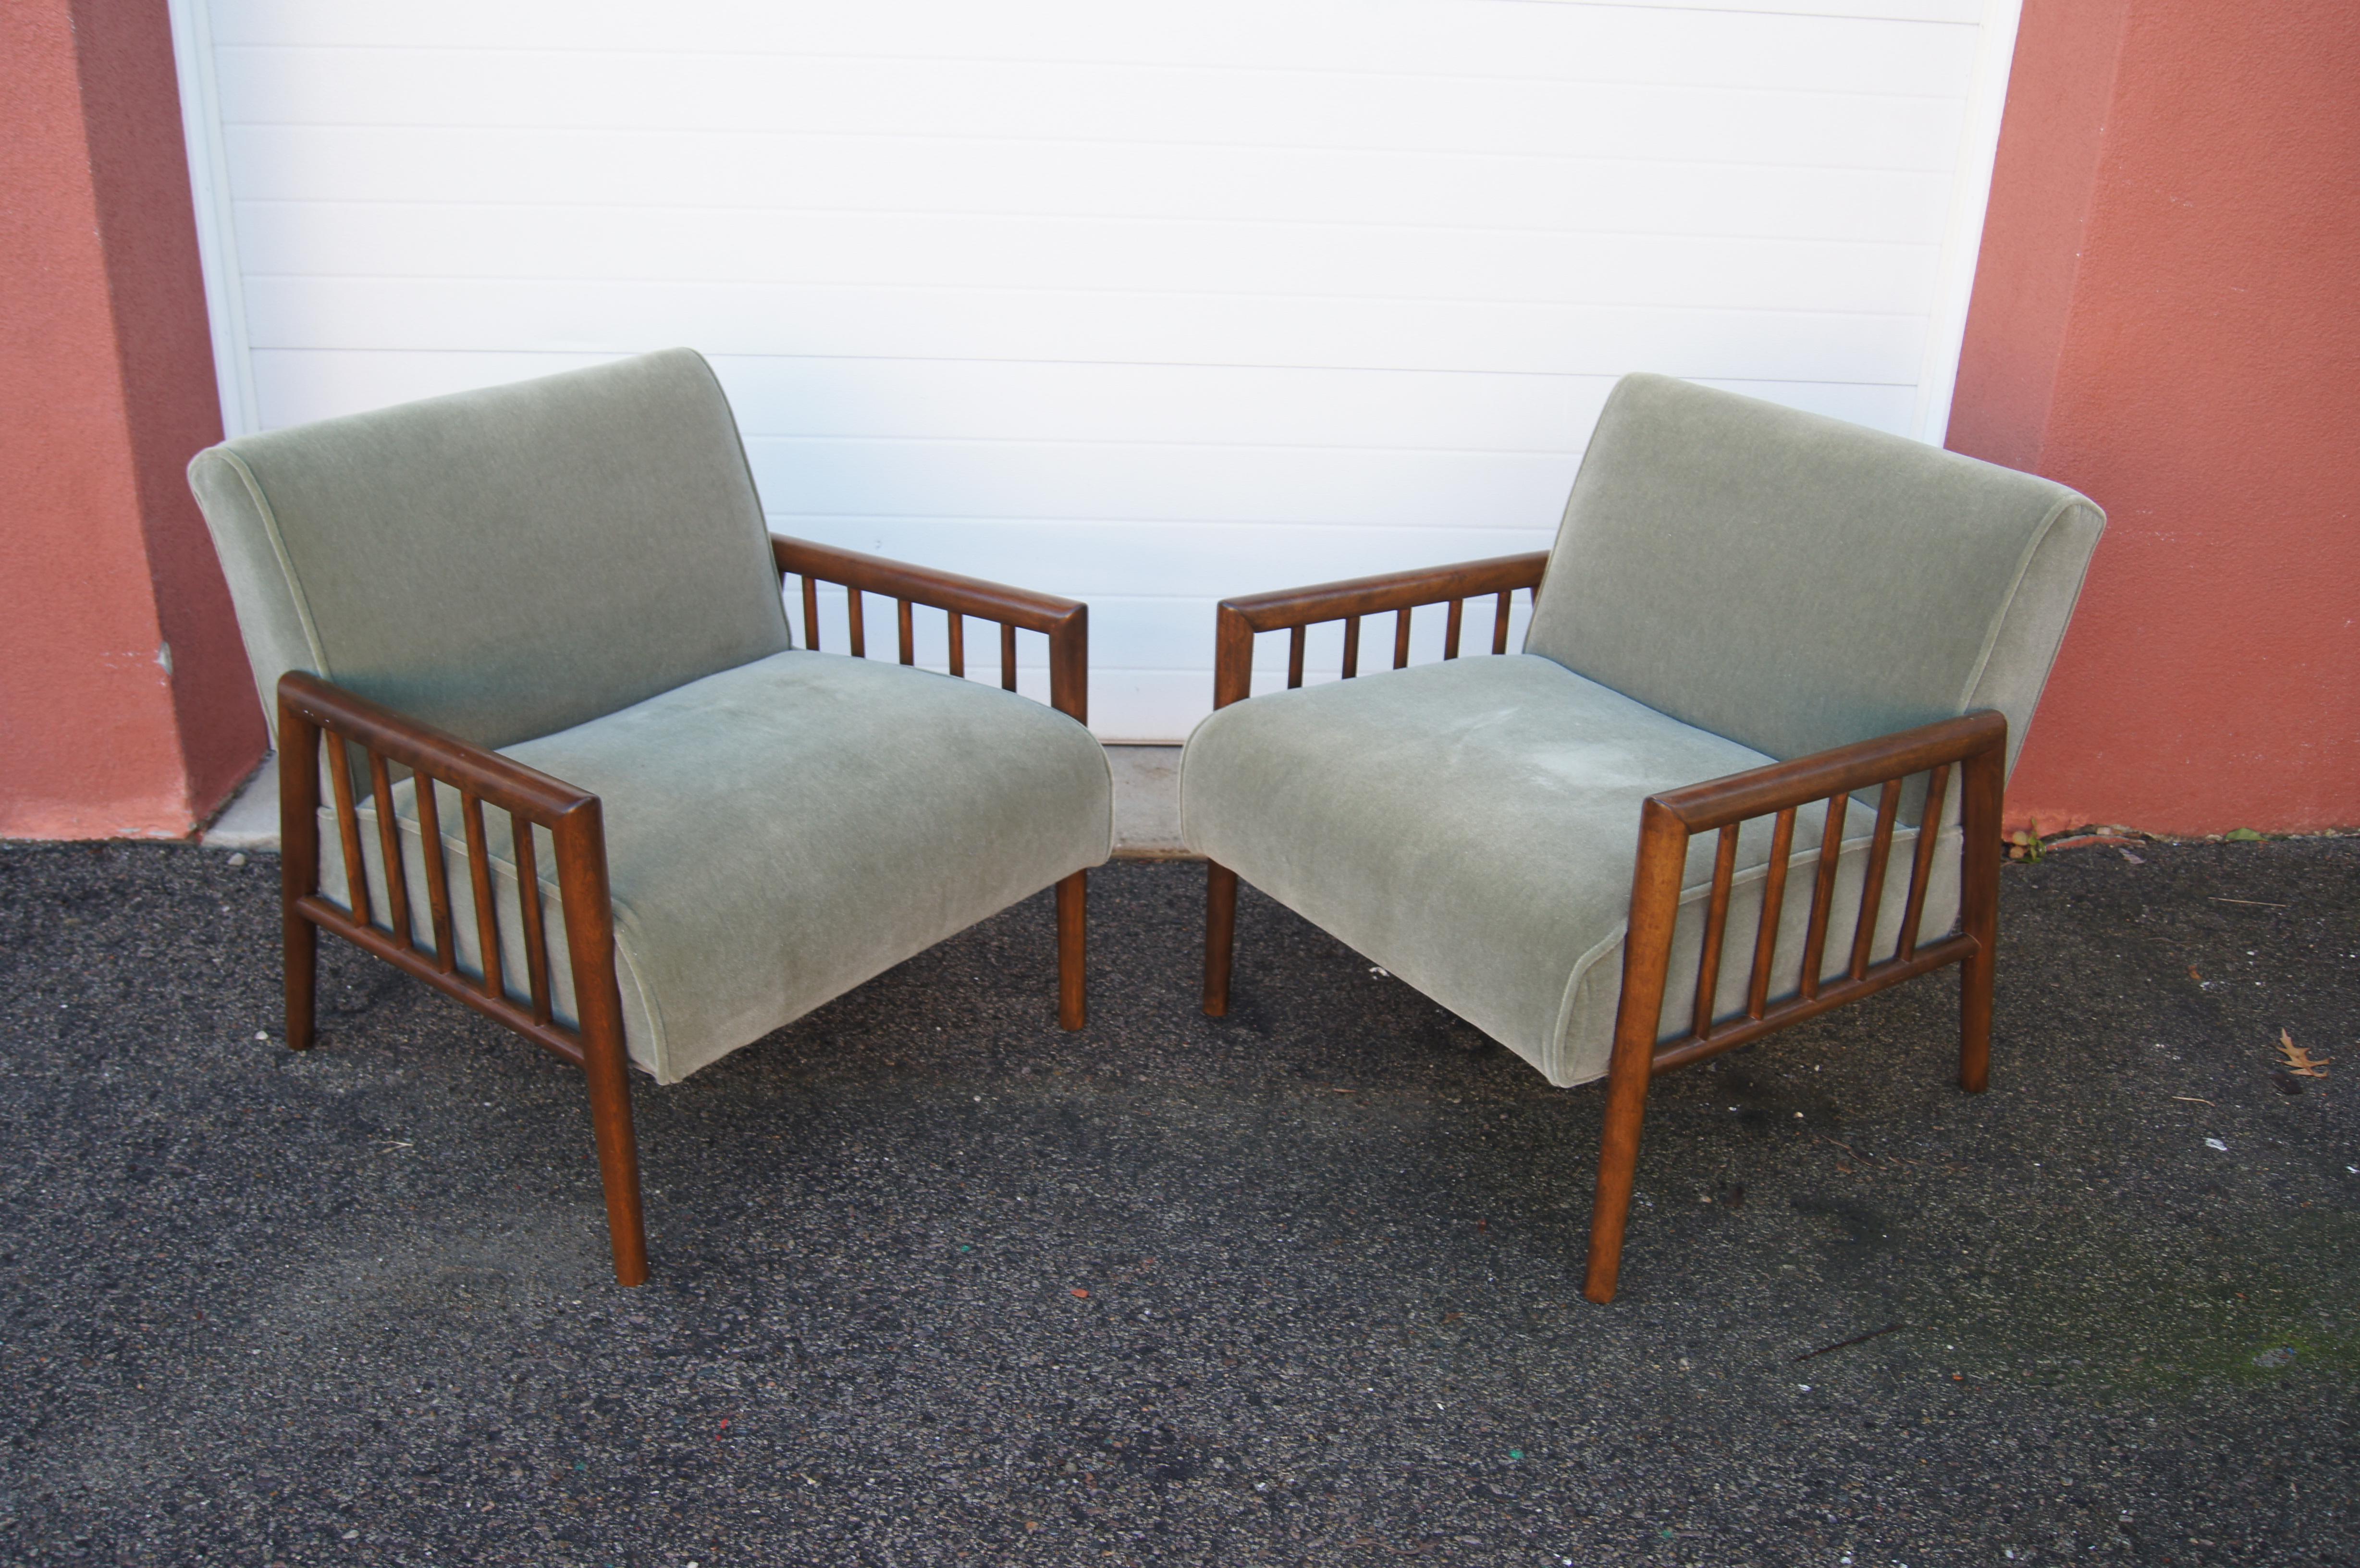 This handsome pair of mid-century lounge chairs by Conant Ball, attributed to Leslie Diamond, features slat-sided frames of a warm-toned maple. Contrasting with the strong angled lines of the solid wood are capacious seats upholstered in a subtle